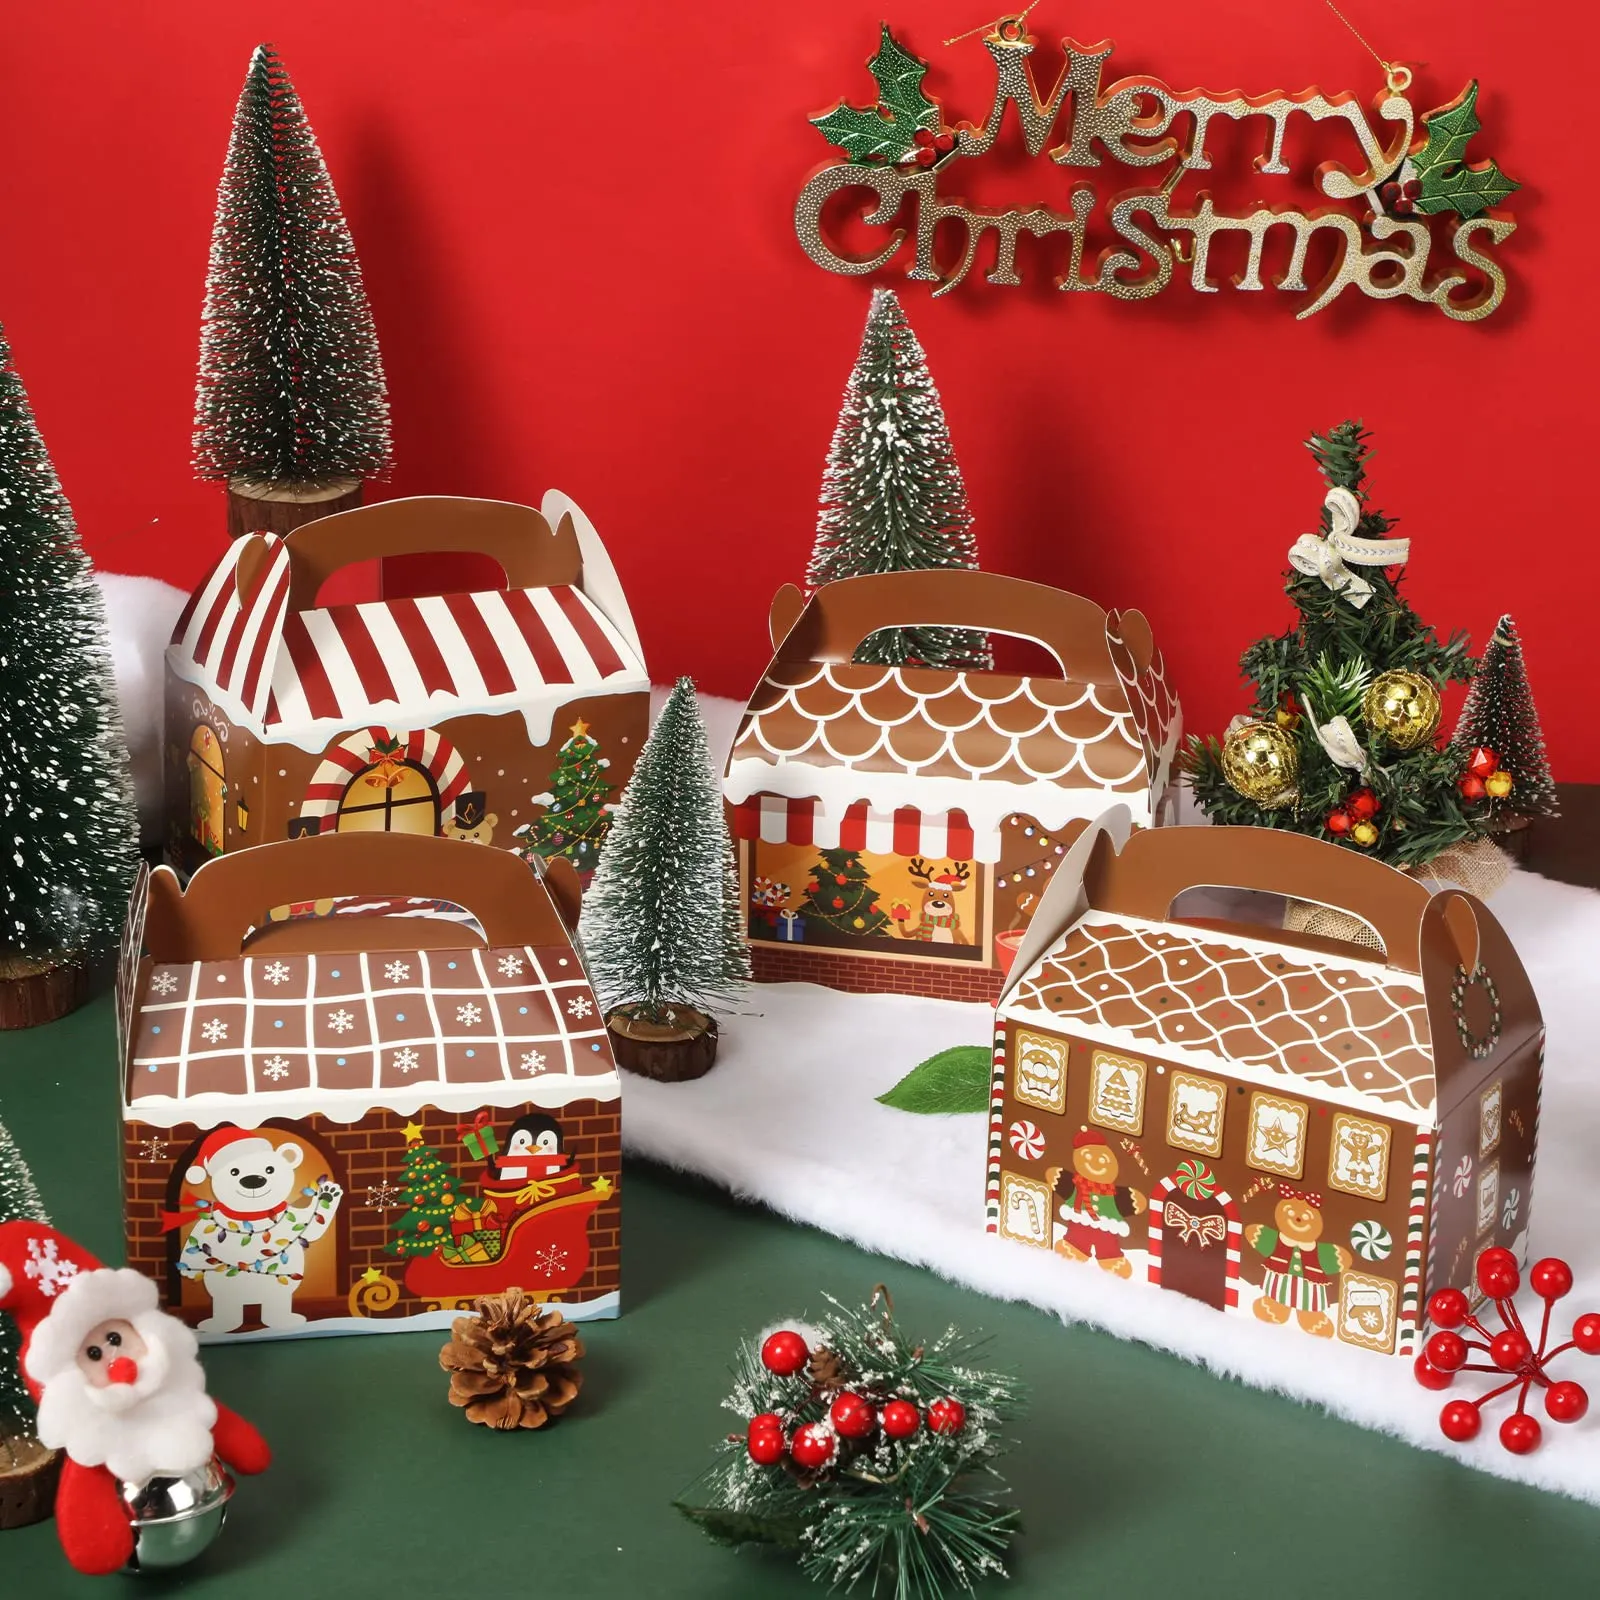 christmas treat boxes 3d gingerbread house cardboard cookie goody gable candy bags with handles xmas paper gift boxes for holiday christmas party favor supplies 6 x 3.5 x 3.5 inch